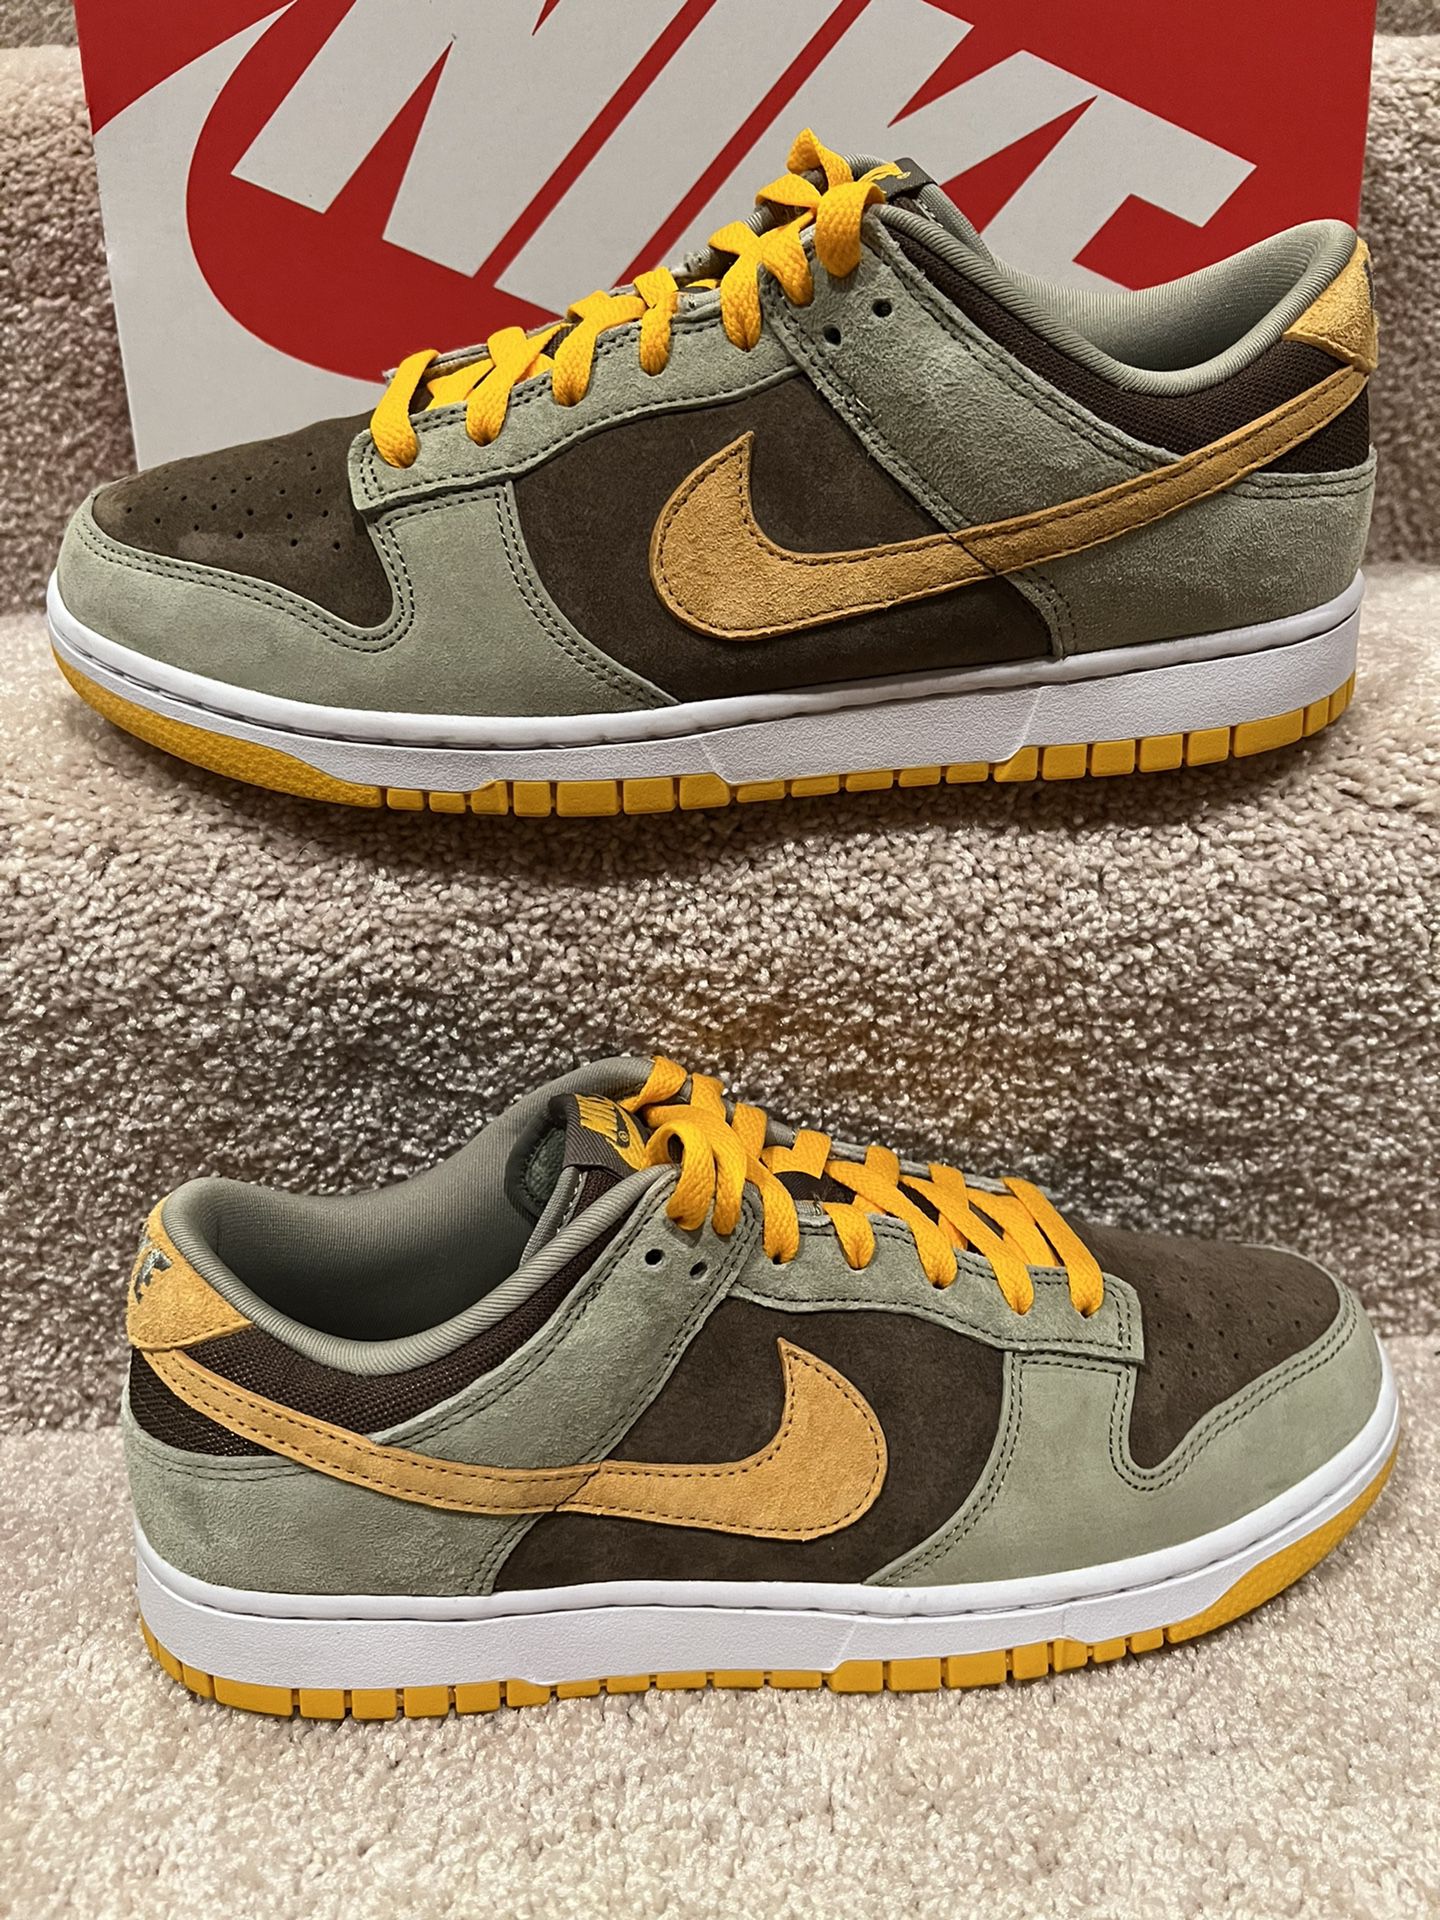 Nike Dunk Low ▫️ Dusty Olive ▫️ Size 10 1/2